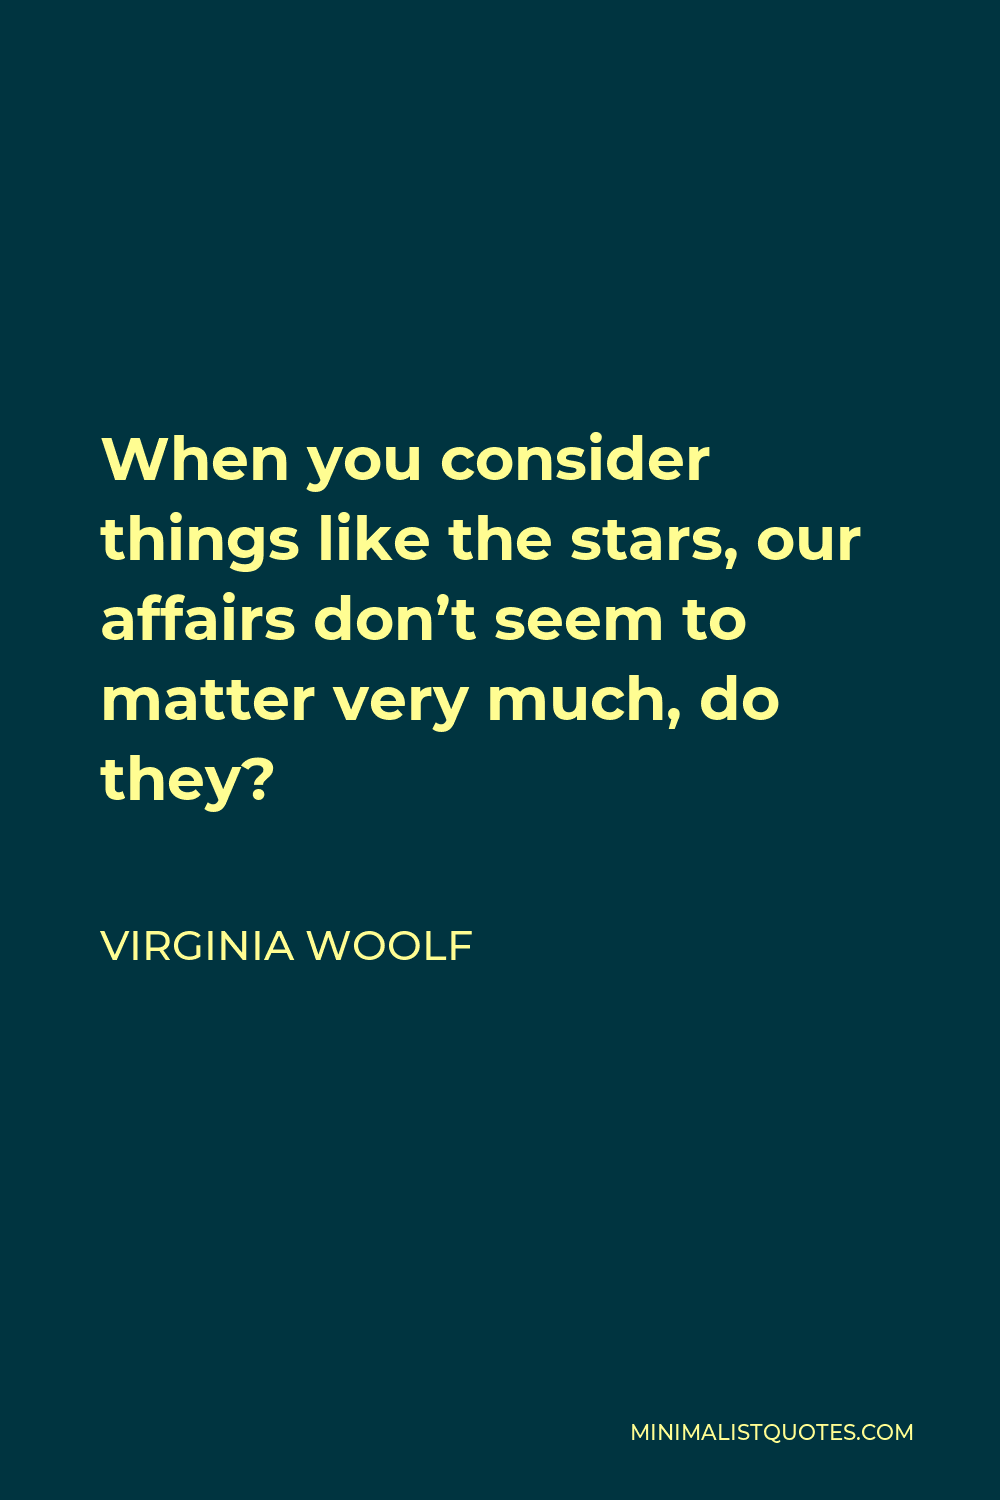 Virginia Woolf Quote - When you consider things like the stars, our affairs don’t seem to matter very much, do they?